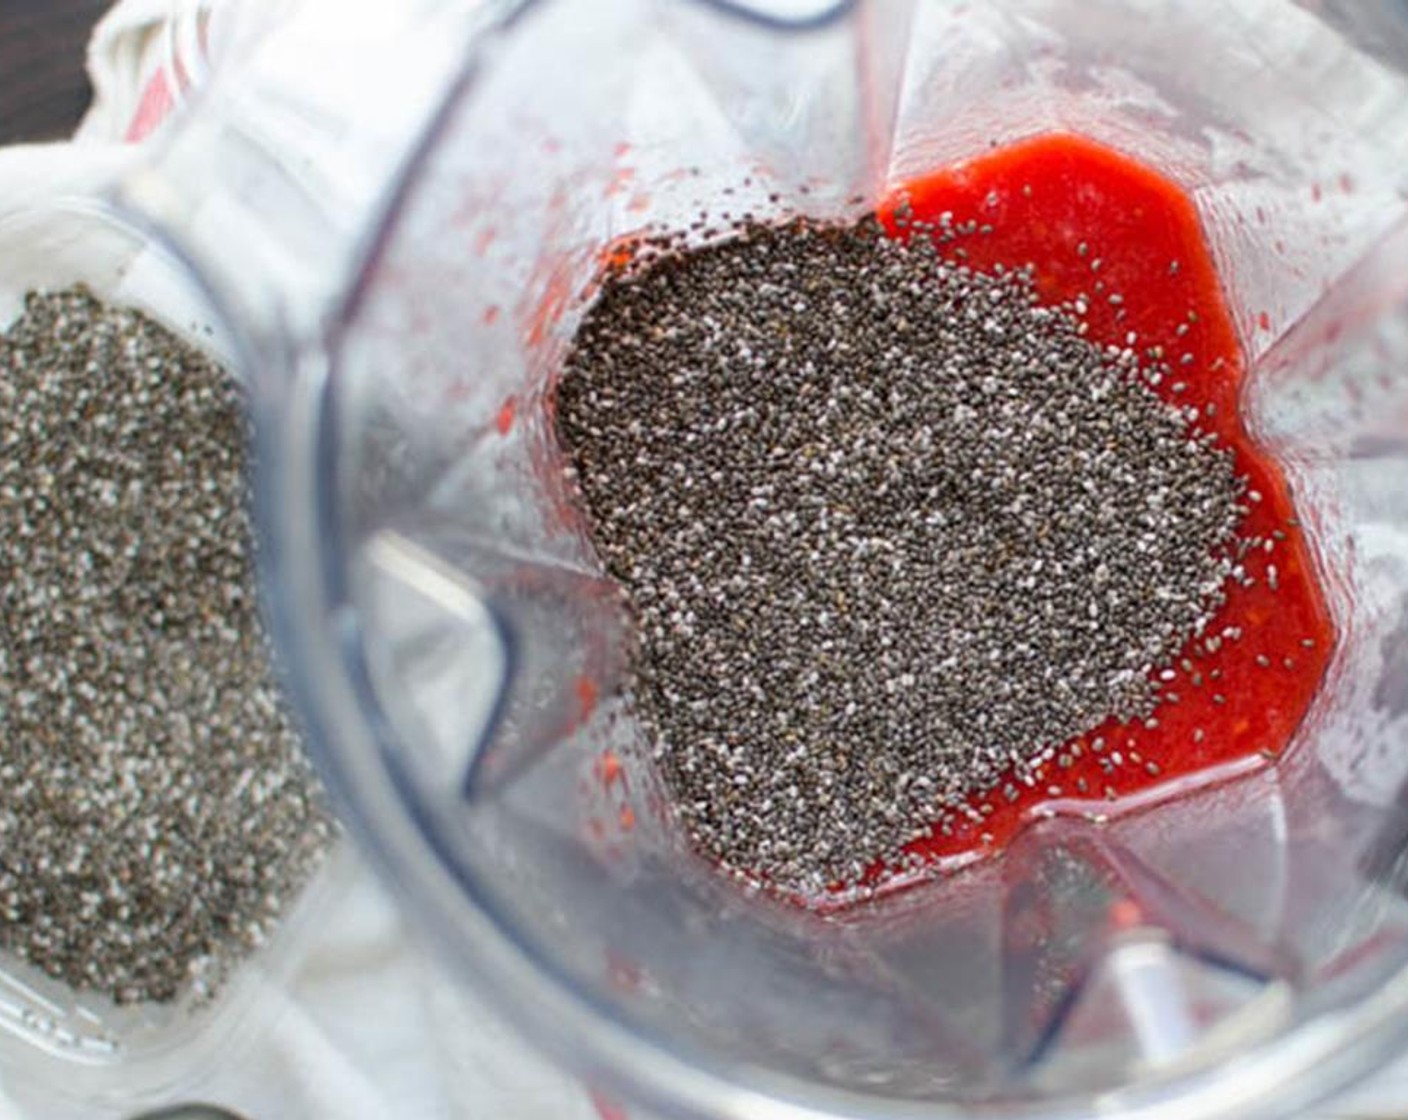 step 6 Add the Chia Seeds (2 Tbsp) plus an additional teaspoon and pulse 2 to 3 more times to combine.